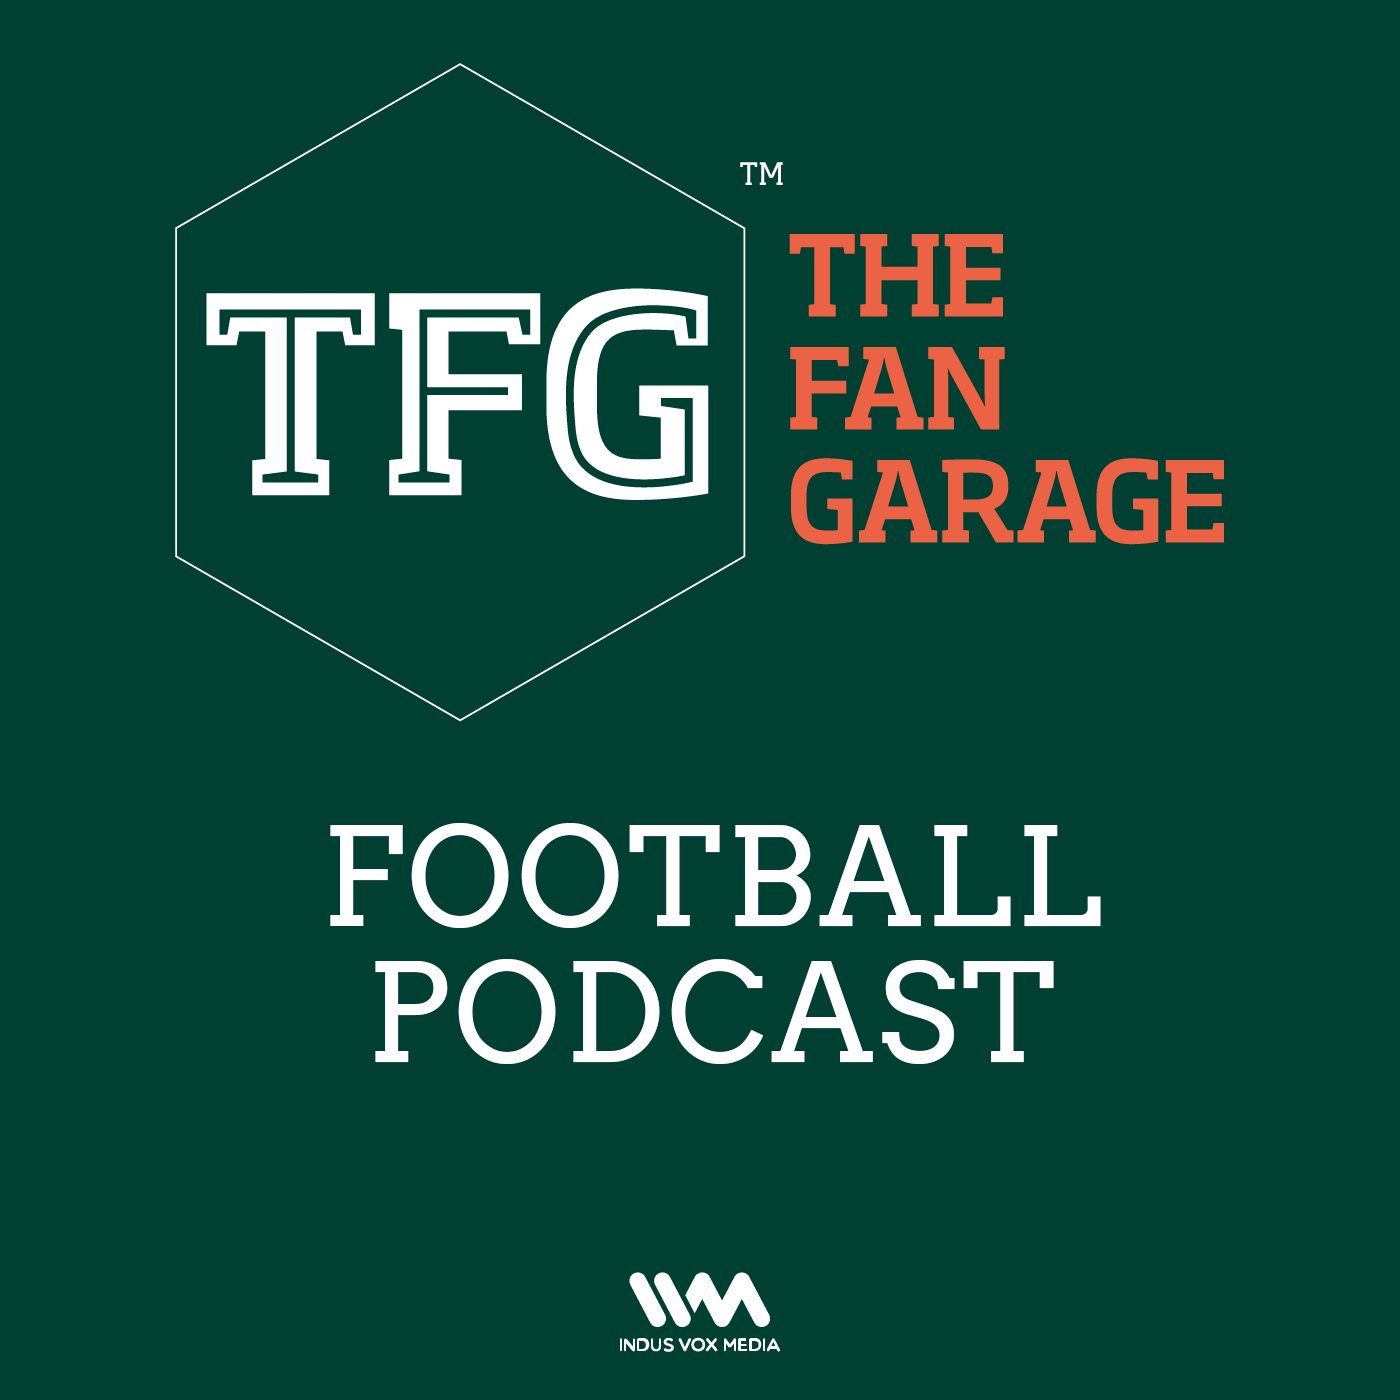 TFG Indian Football Ep.169: Macau vs India Preview - LIVE FROM MACAU!